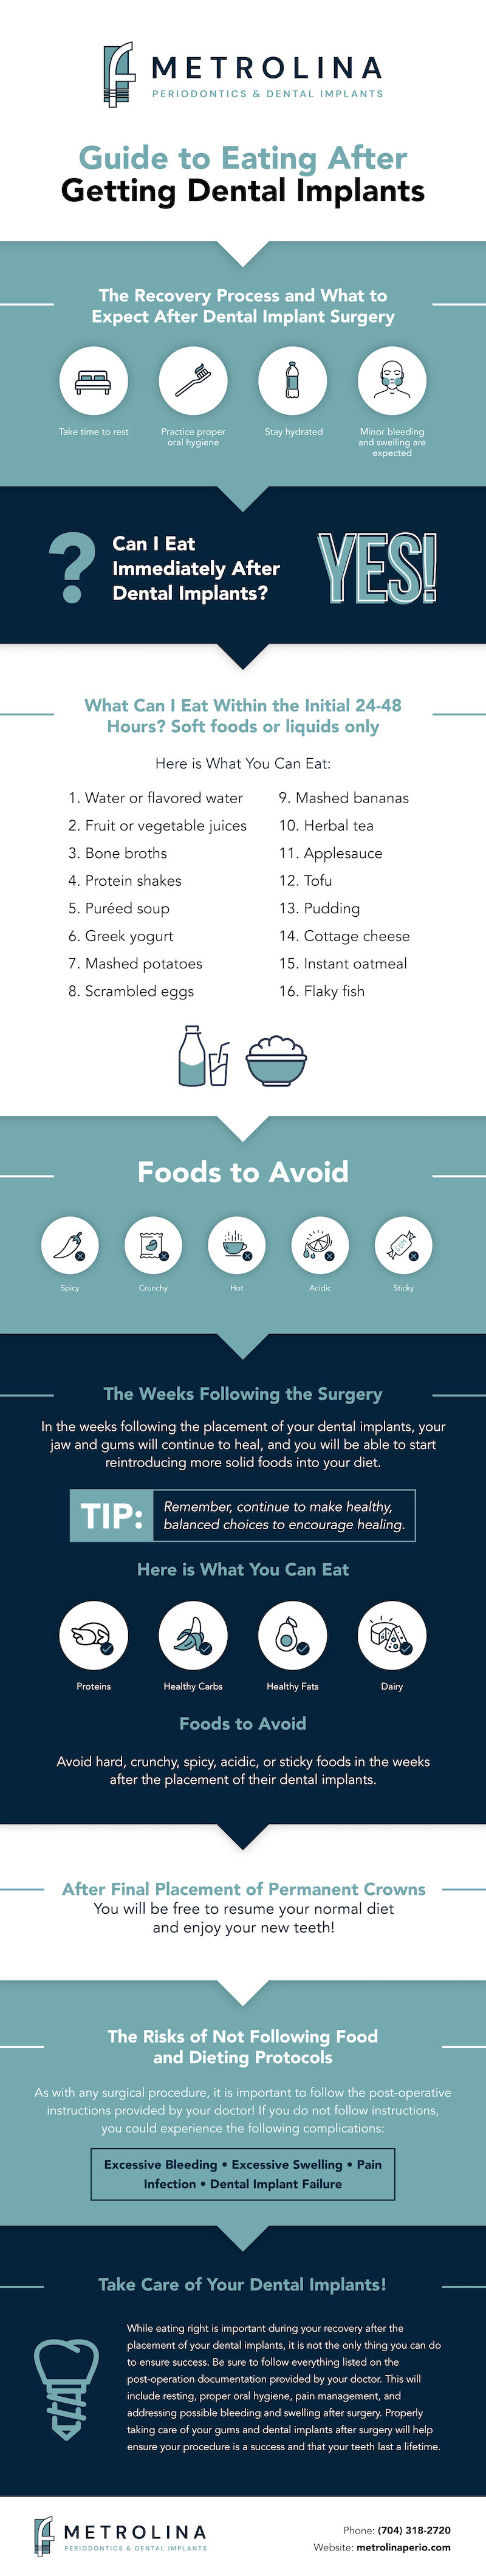 Guide to Eating After Getting Dental Implants